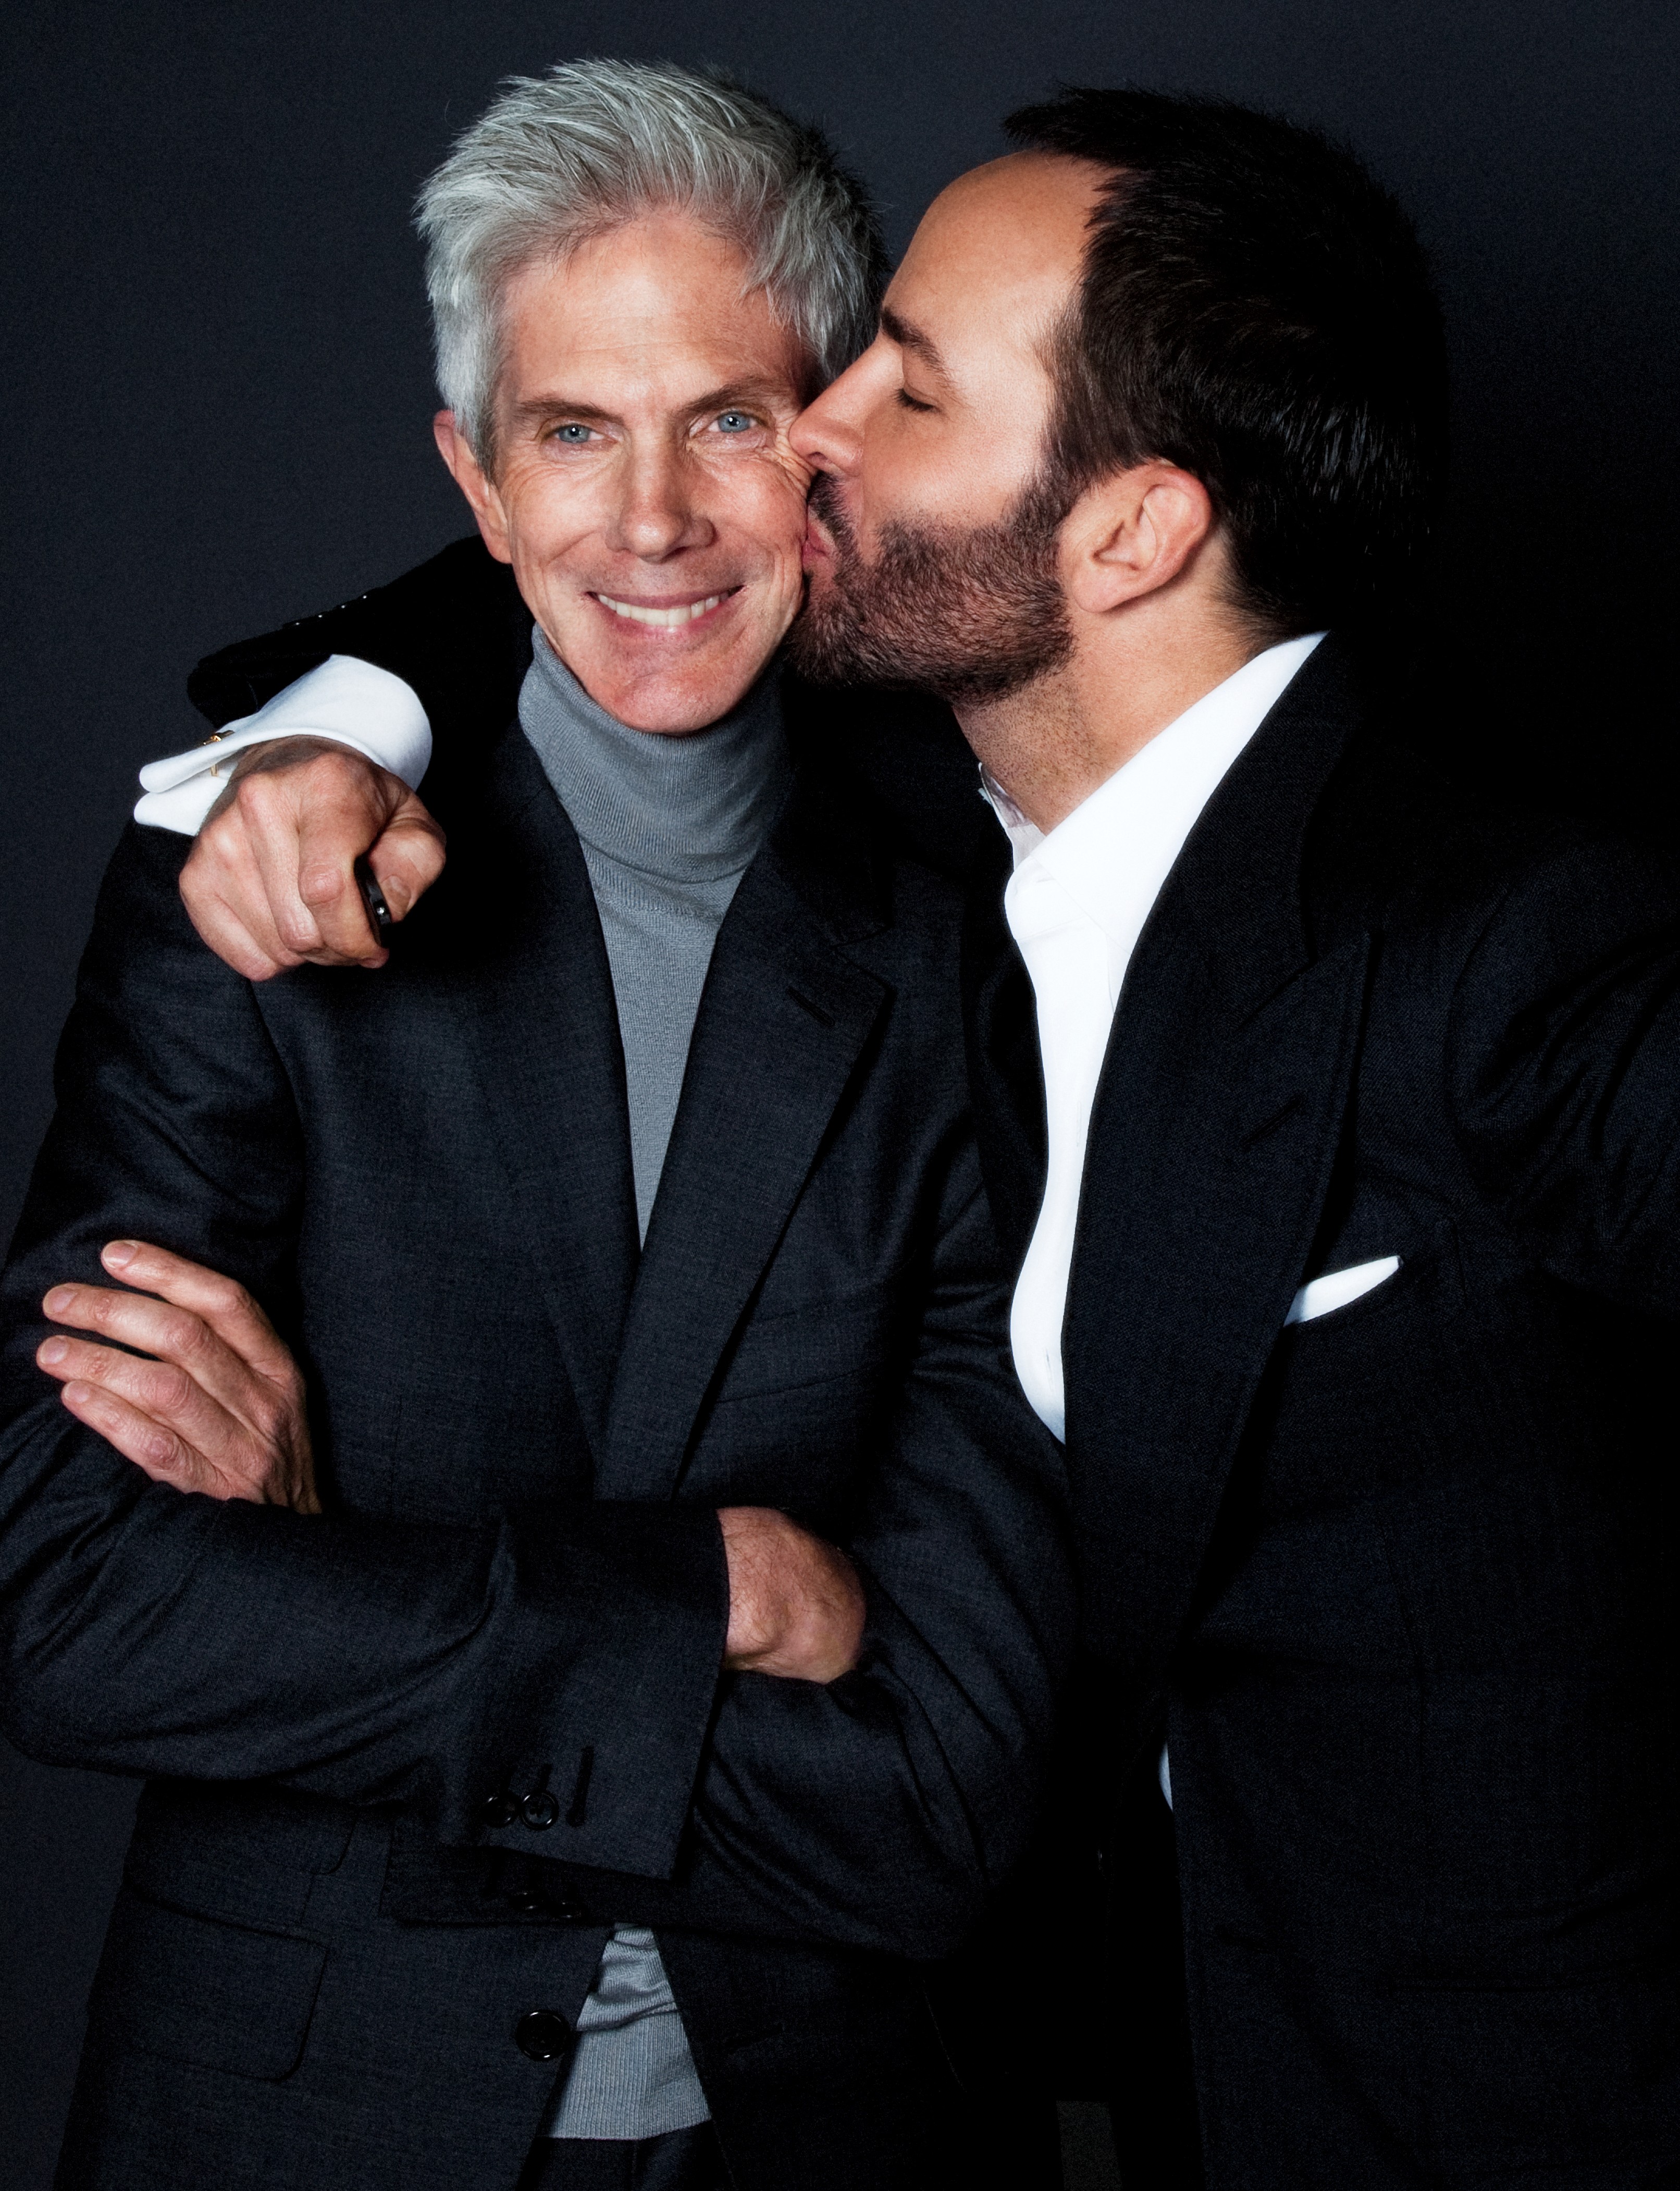 Tom Ford On Finding 'Love At First Sight' & Making His 30-Year